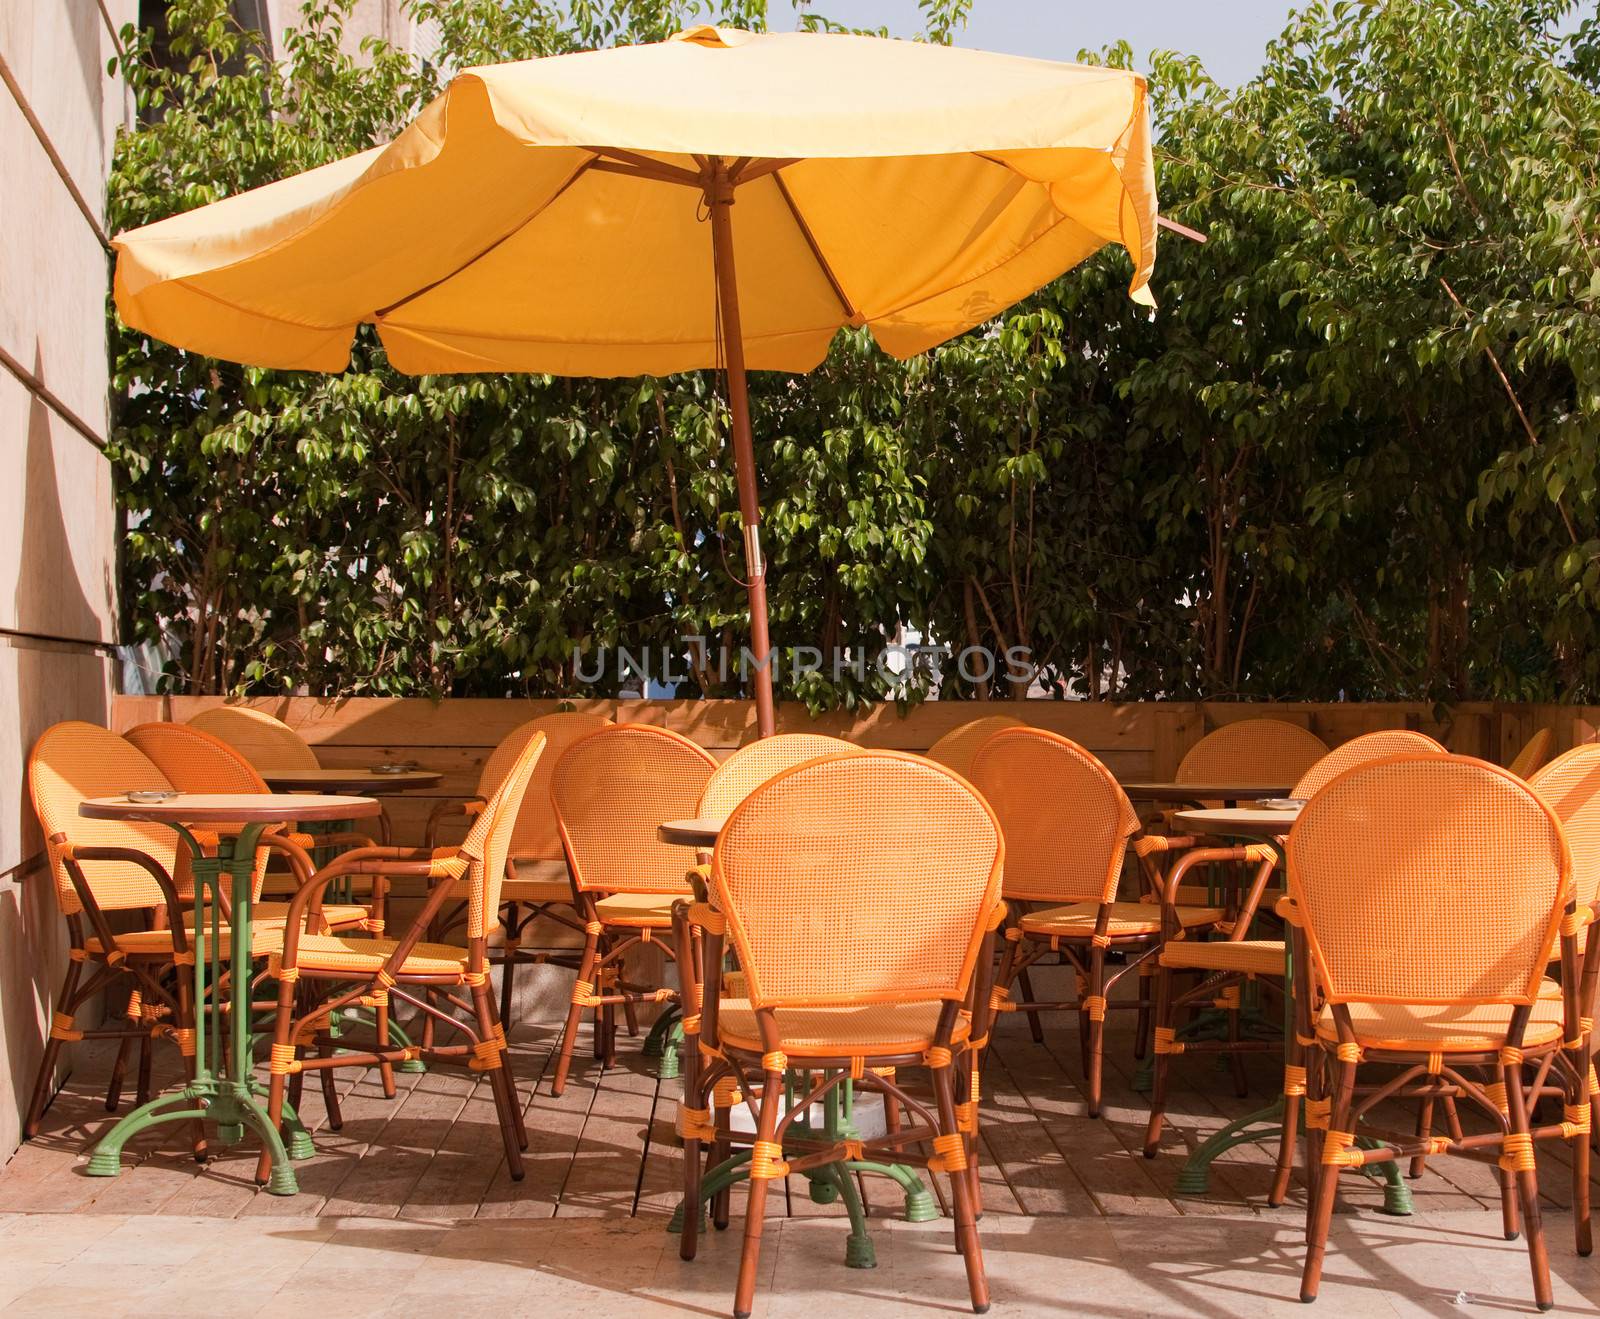 Yellow outdoor cafe with wicker chairs.